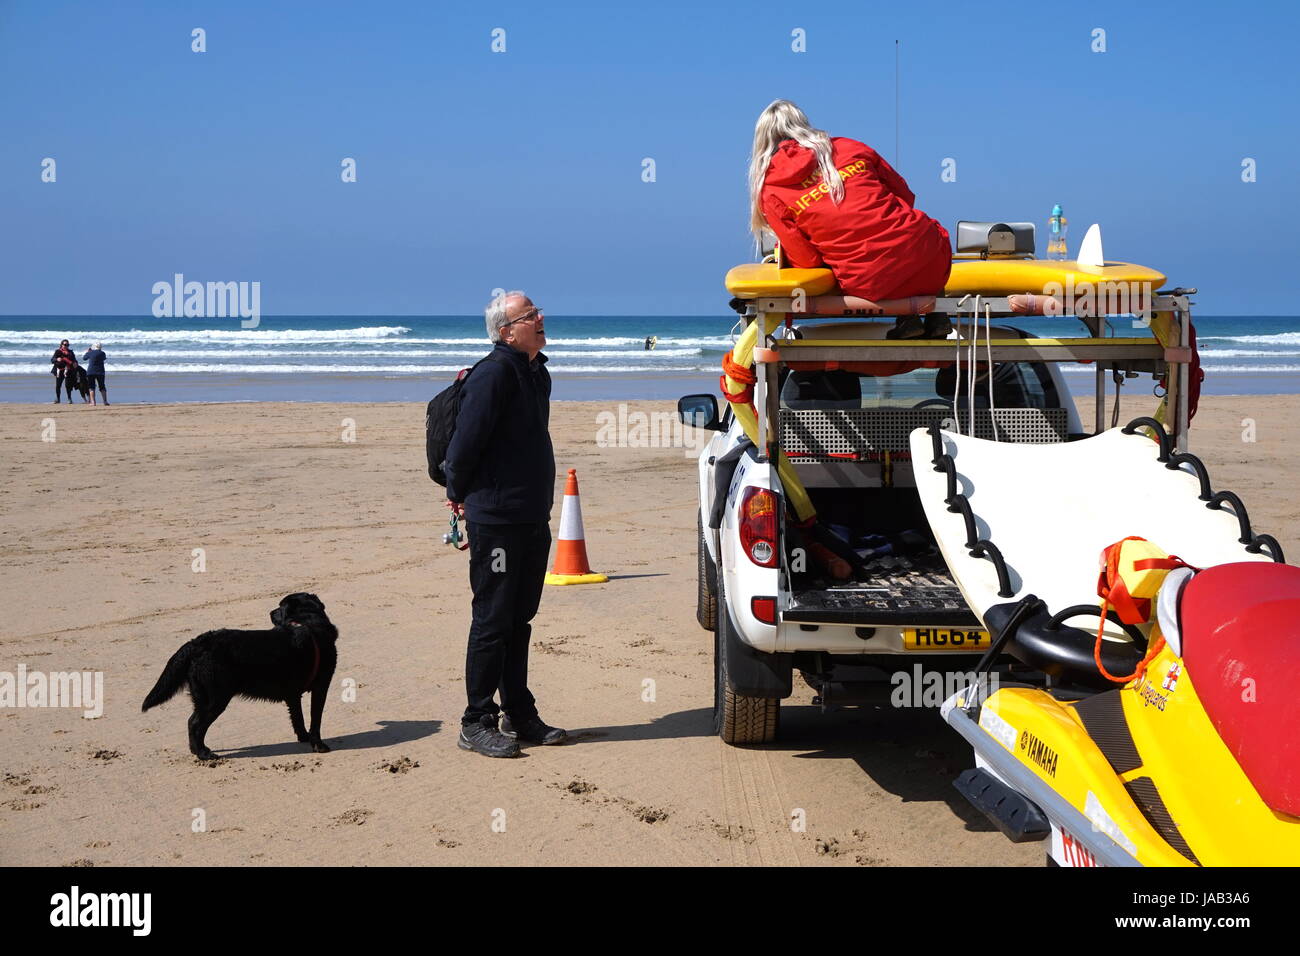 Newquay, Cornwall, UK - April 7 2017: Female RNLI lifeguard talking to a man with a dog on a surfing beach in Newquay Stock Photo